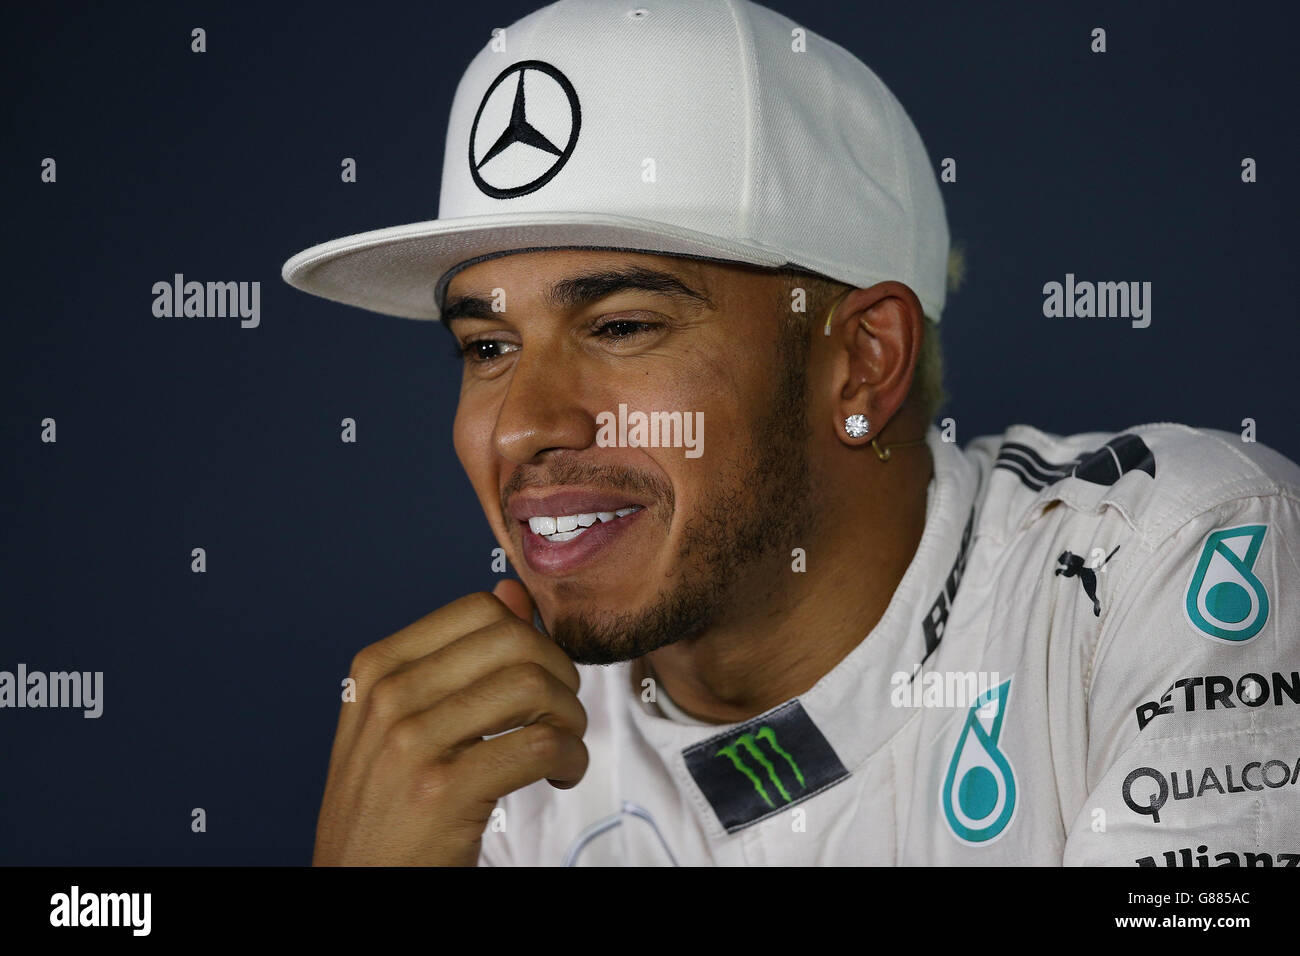 Motor Racing - Formula One World Championship - 2015 Italian Grand Prix - Qualifying Day - Monza Circuit. Mercedes Lewis Hamilton during a press conference after qualifying pole for the 2015 Italian Grand Prix at Monza, Italy. Stock Photo